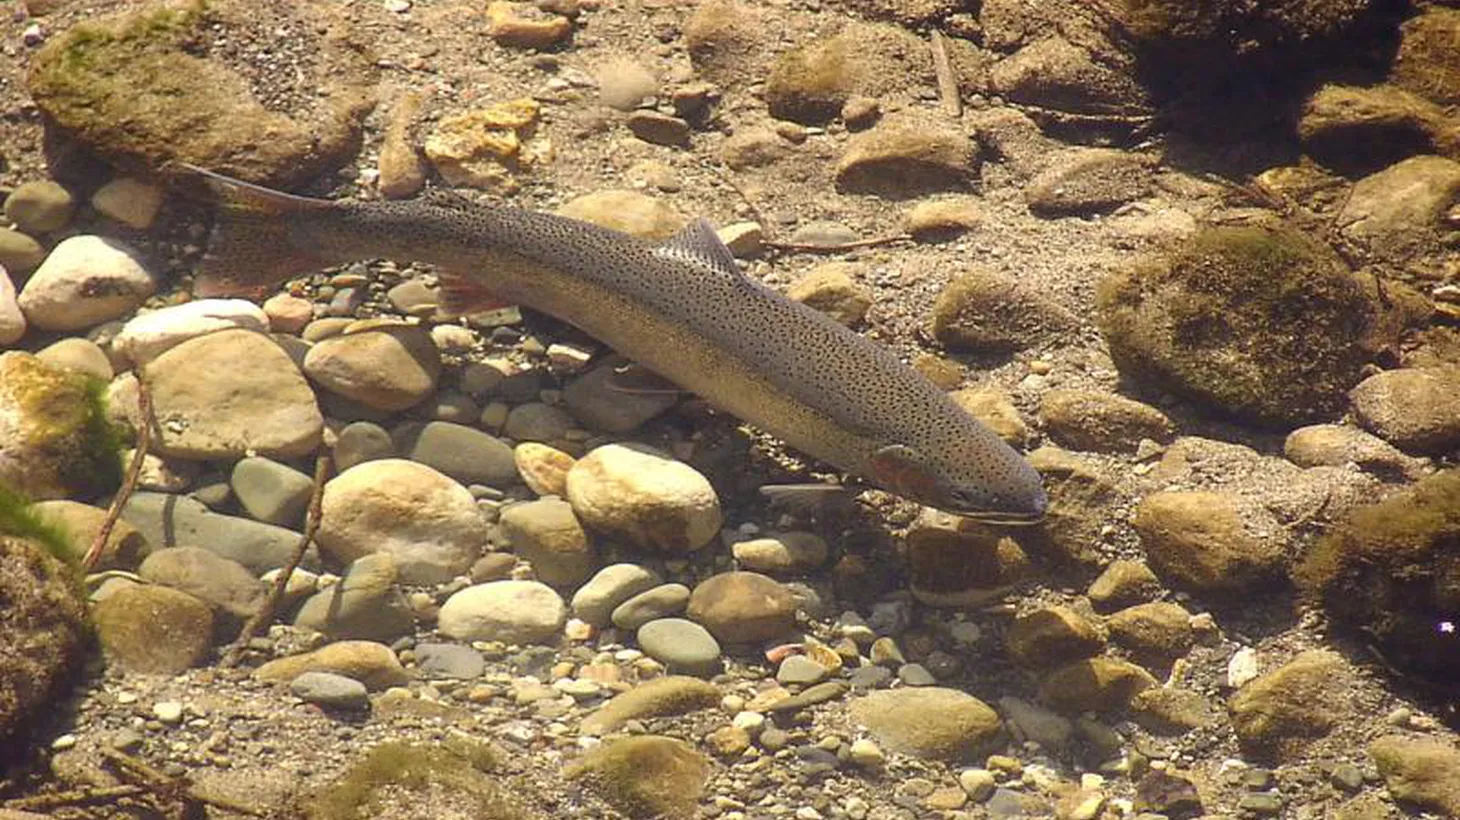 Scientists, conservationists, and fly-fishers are working to bring the Southern steelhead trout back to its native waters in the Santa Monica Mountains.